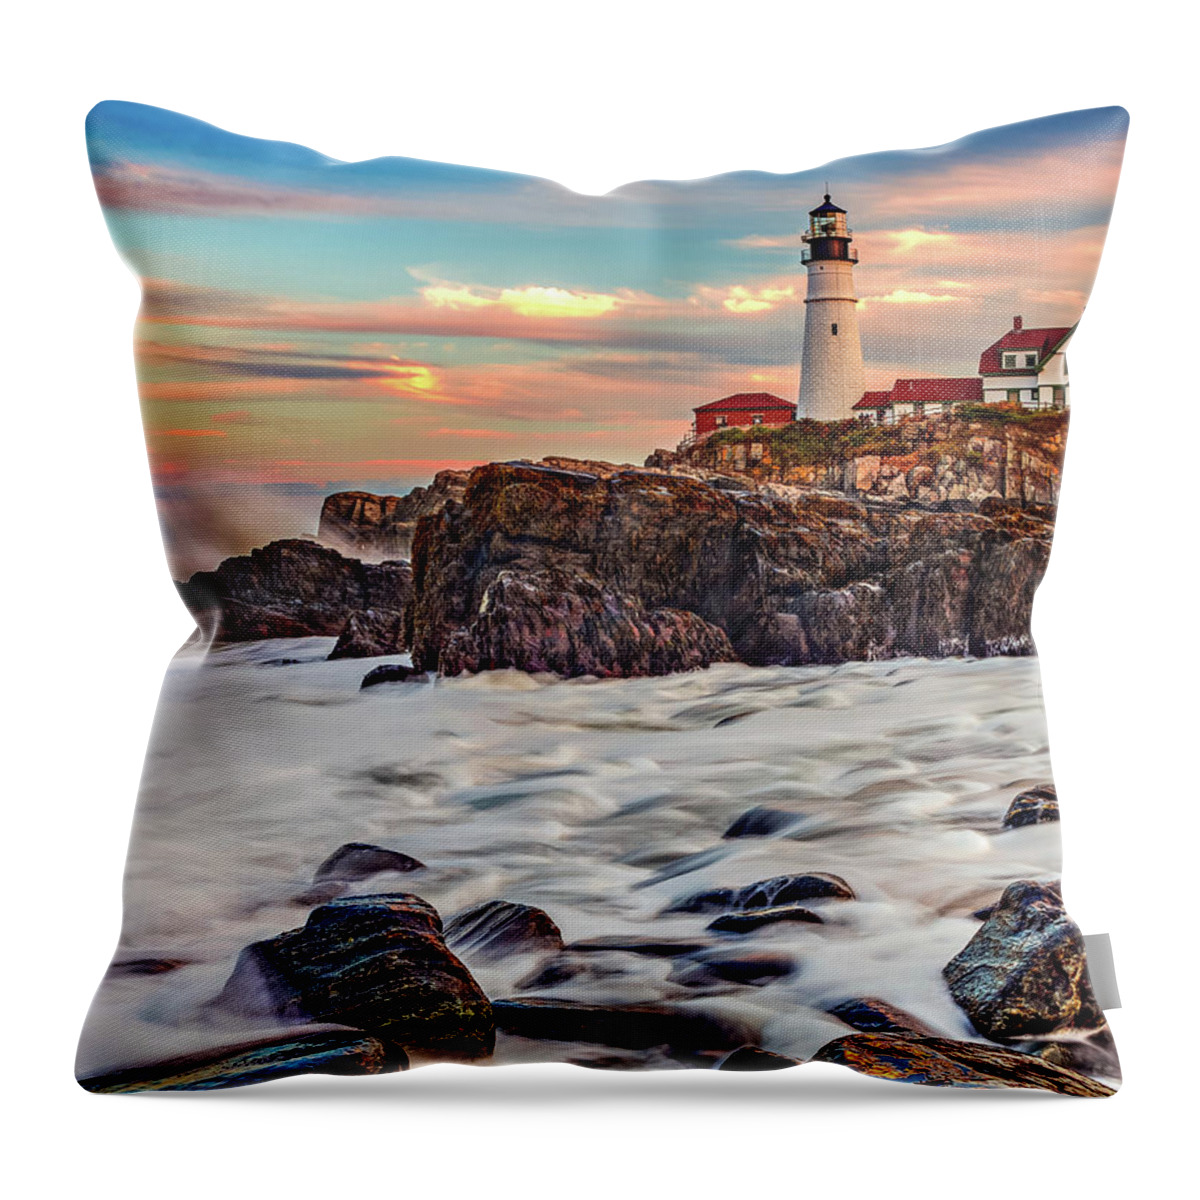 Portland Head Light Throw Pillow featuring the photograph Sunset At The Portland Head Lighthouse Over The Evening Tide by Gregory Ballos